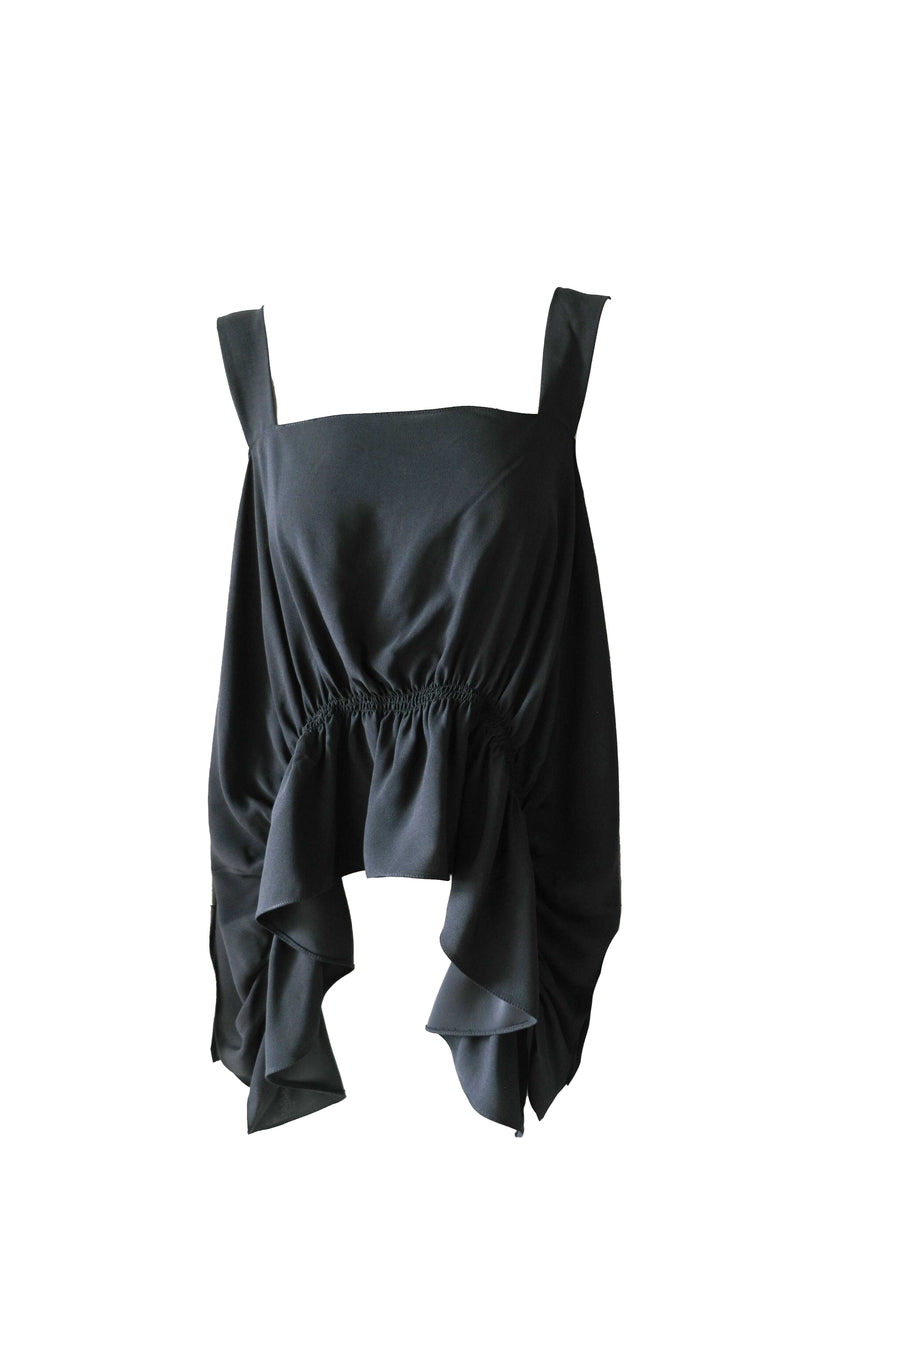 Ruched Top - Black